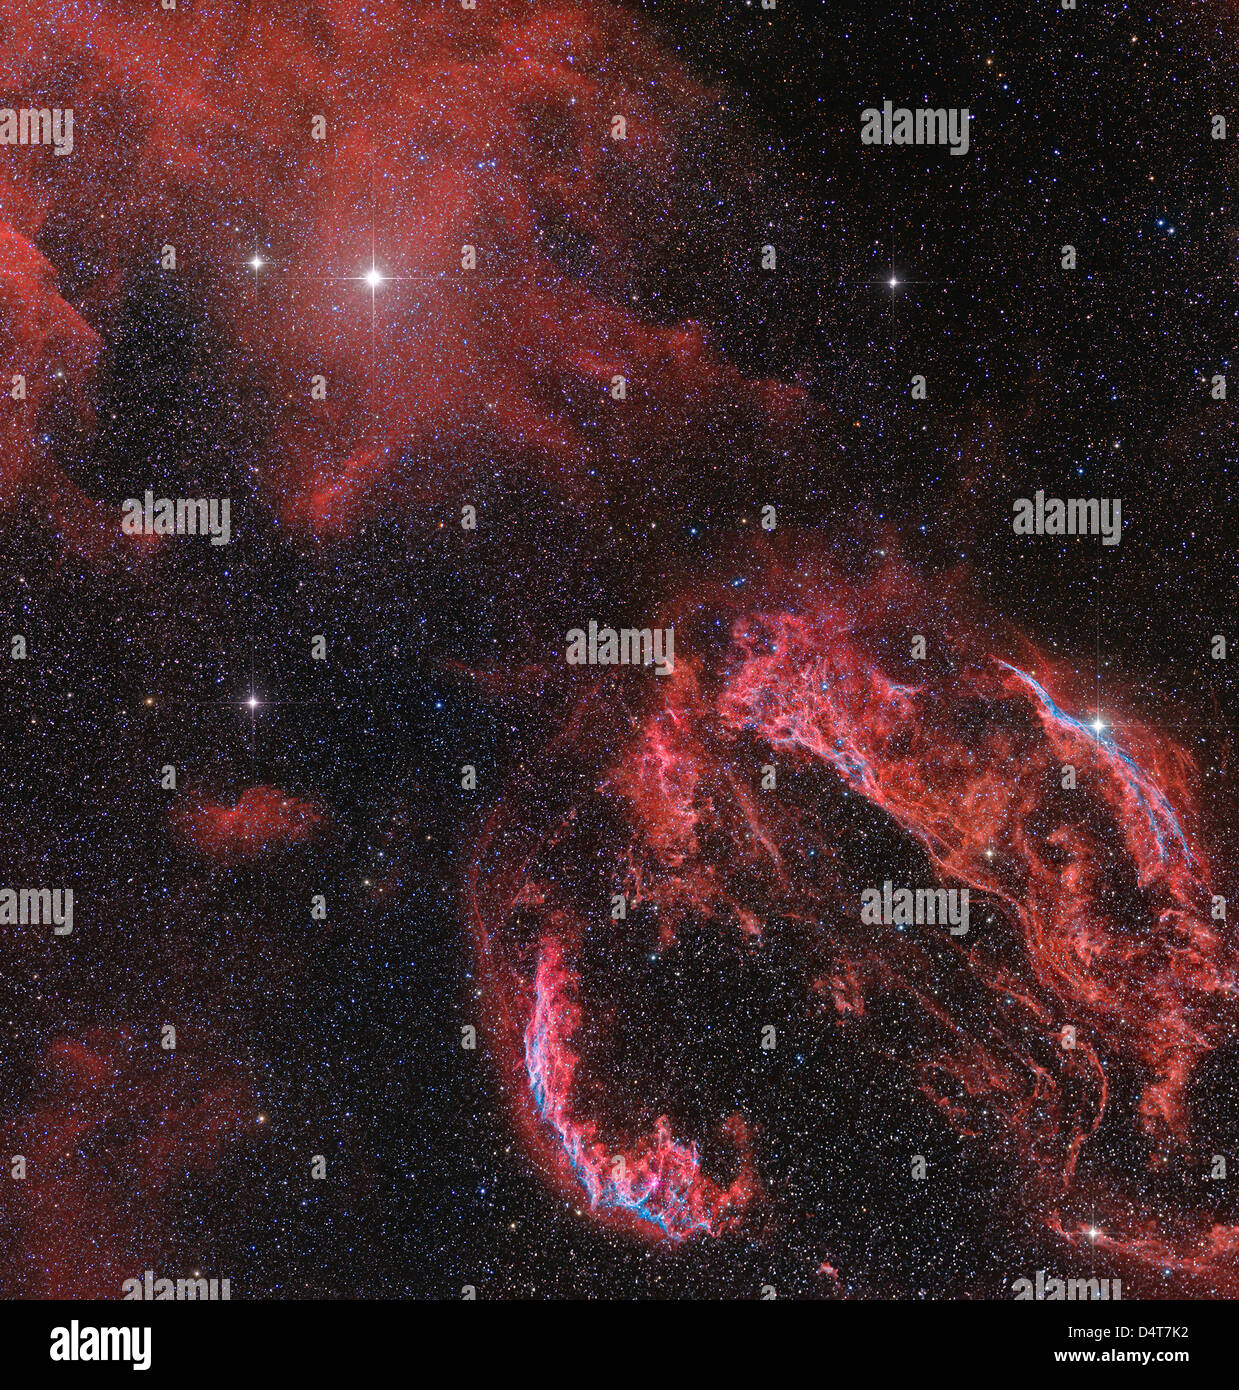 The Veil Nebula in the constellation Cygnus glows red. Stock Photo